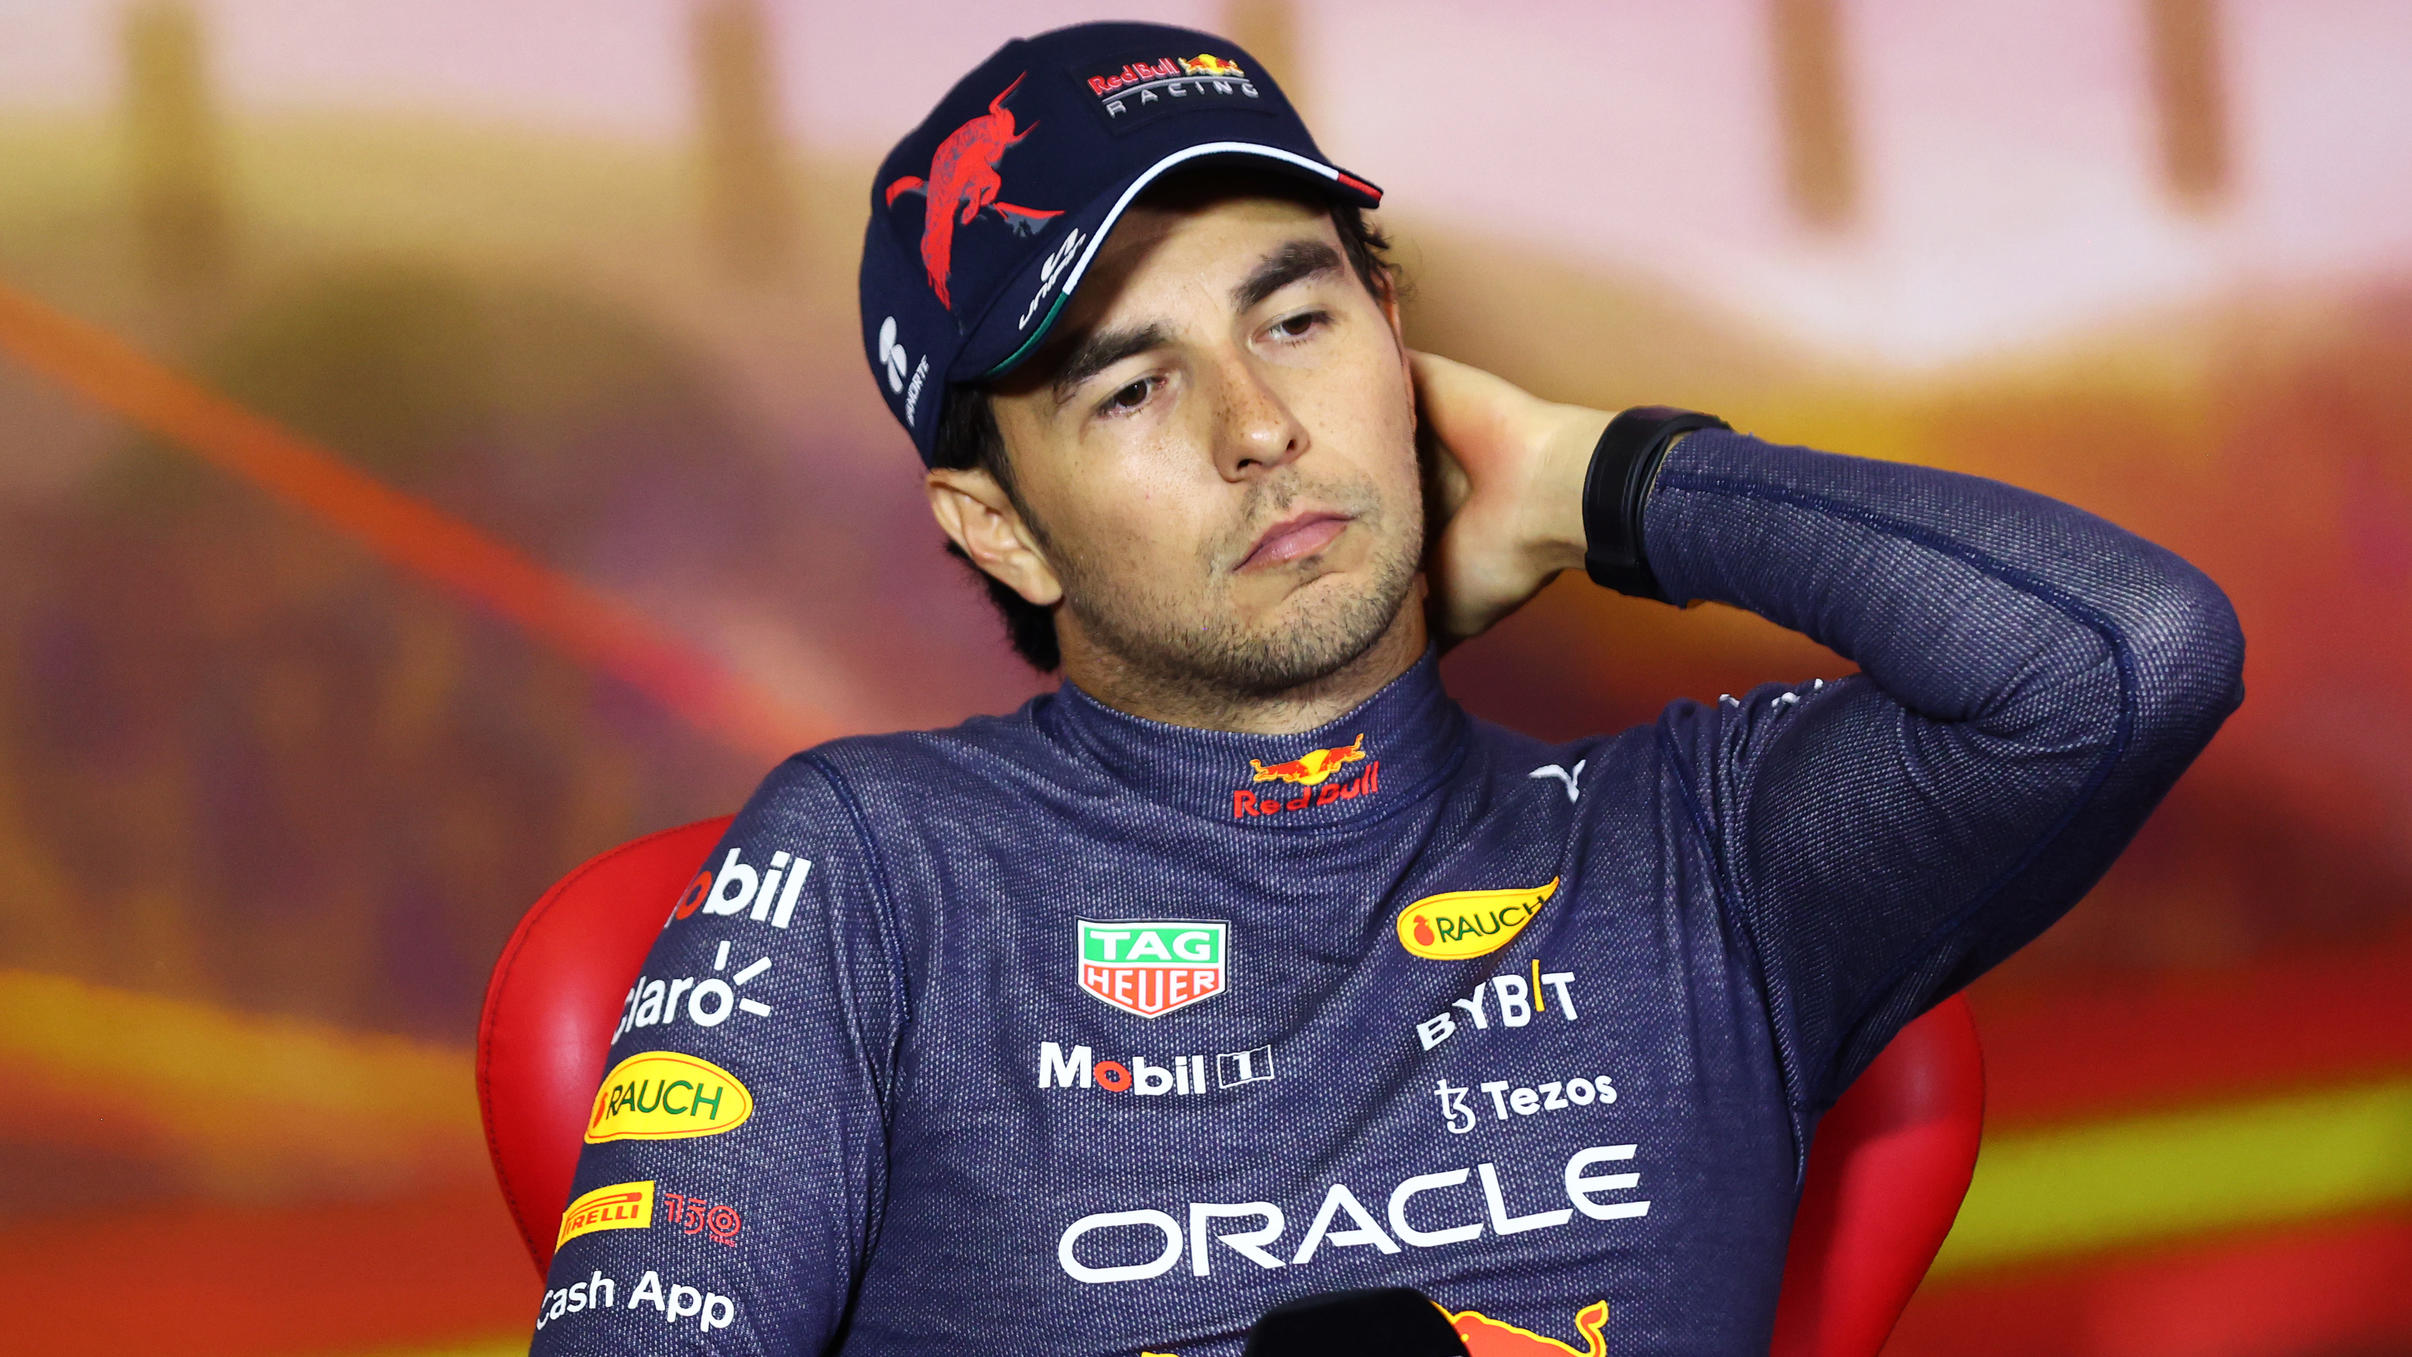 BARCELONA, SPAIN - MAY 22: Second placed Sergio Perez of Mexico and Oracle Red Bull Racing looks on in the press conference after the F1 Grand Prix of Spain at Circuit de Barcelona-Catalunya on May 22, 2022 in Barcelona, Spain. (Photo by Dan Istitene